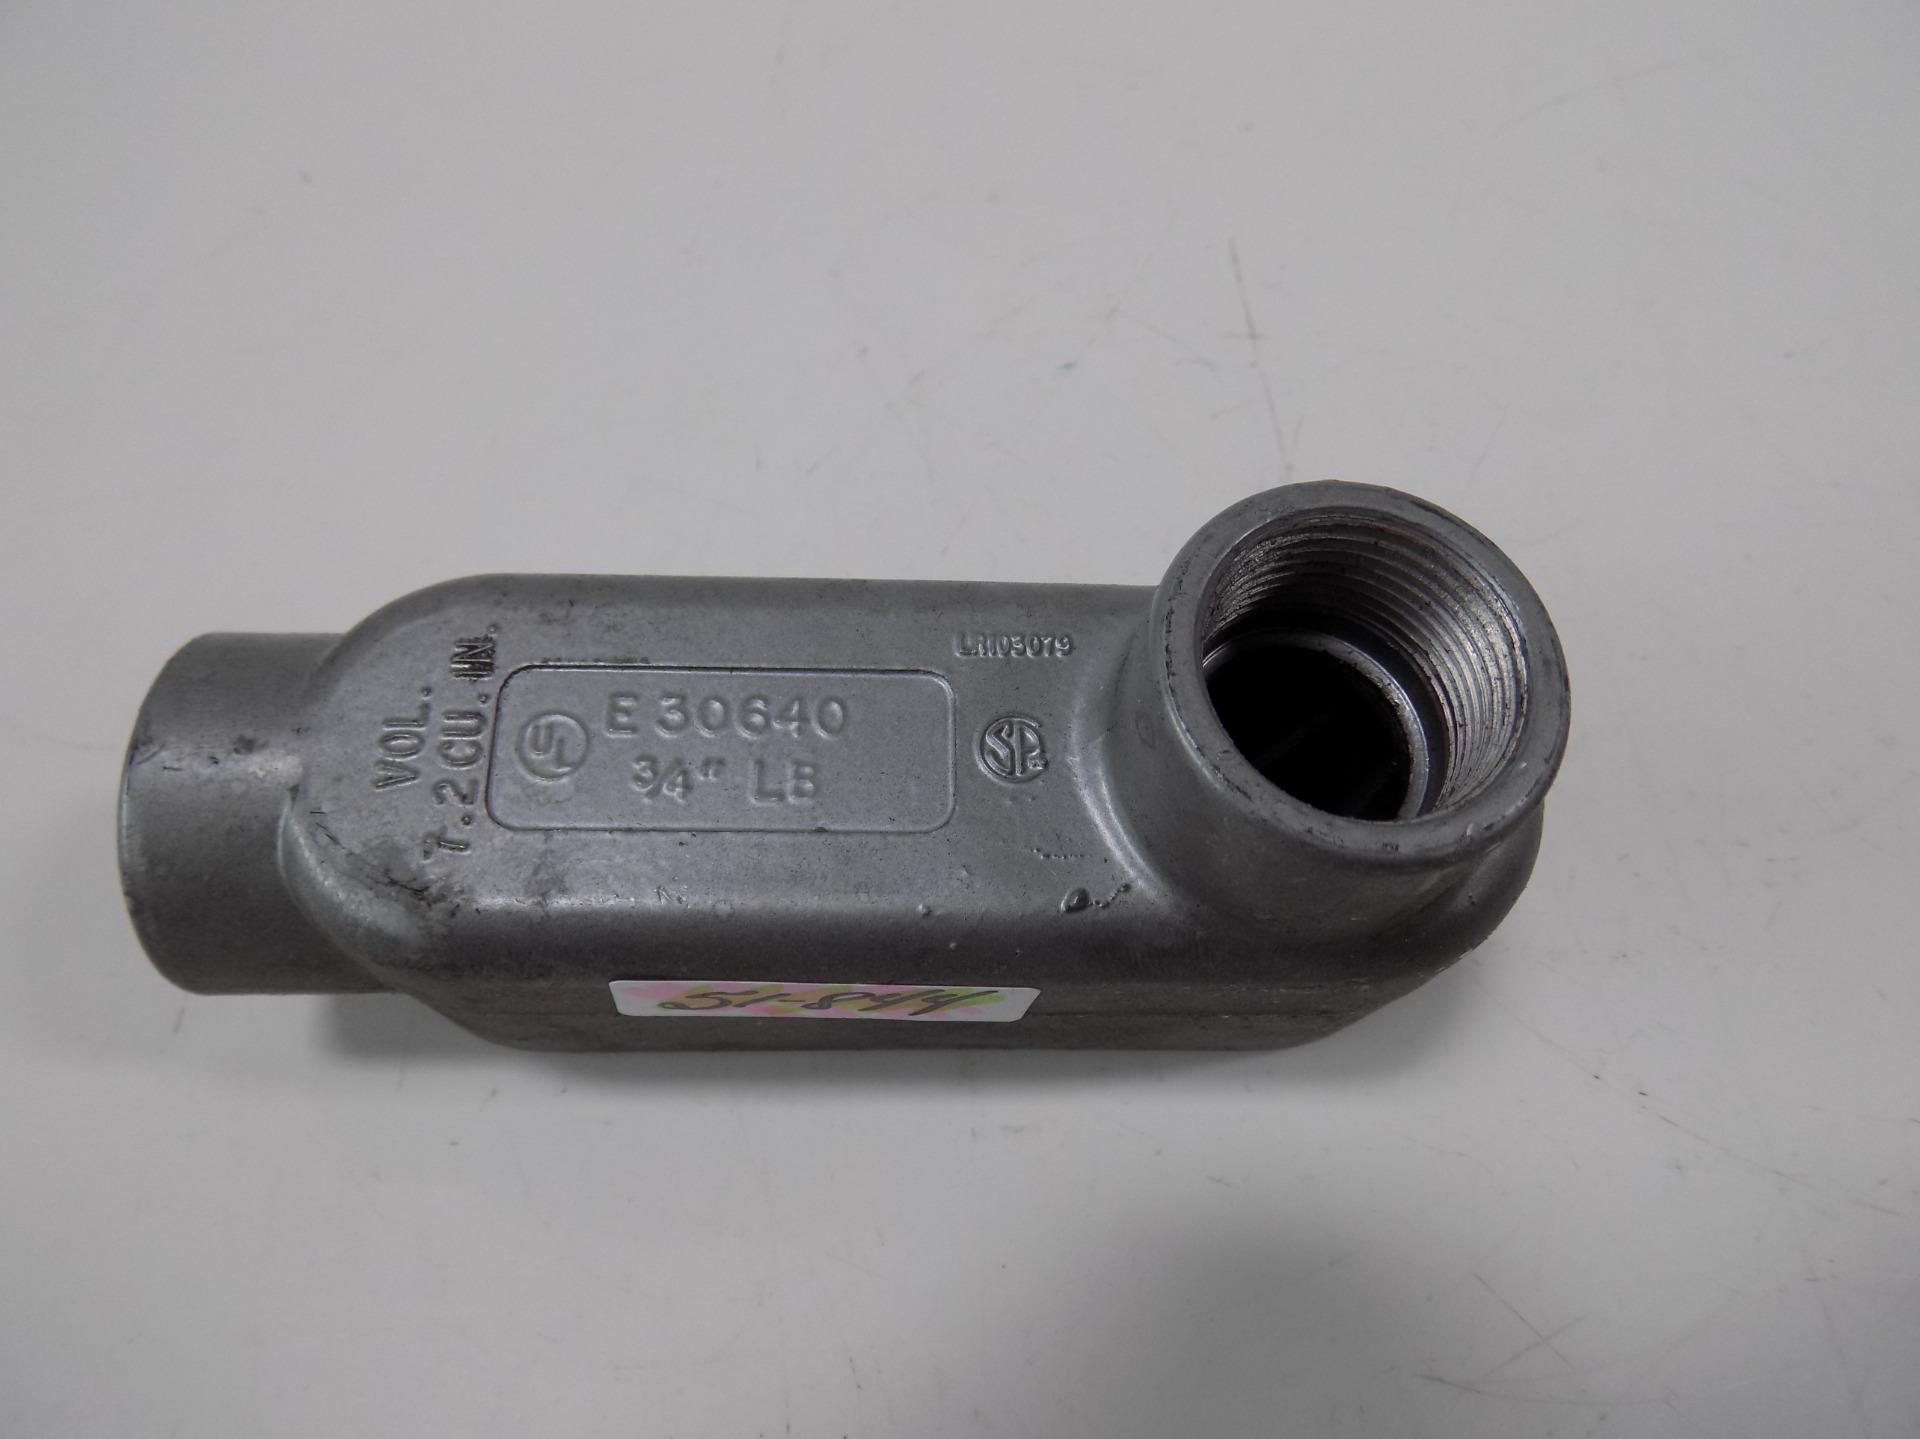 3/4"LB CONDUIT OUTLET BODY W/COVER AND GASKET E30640 eBay